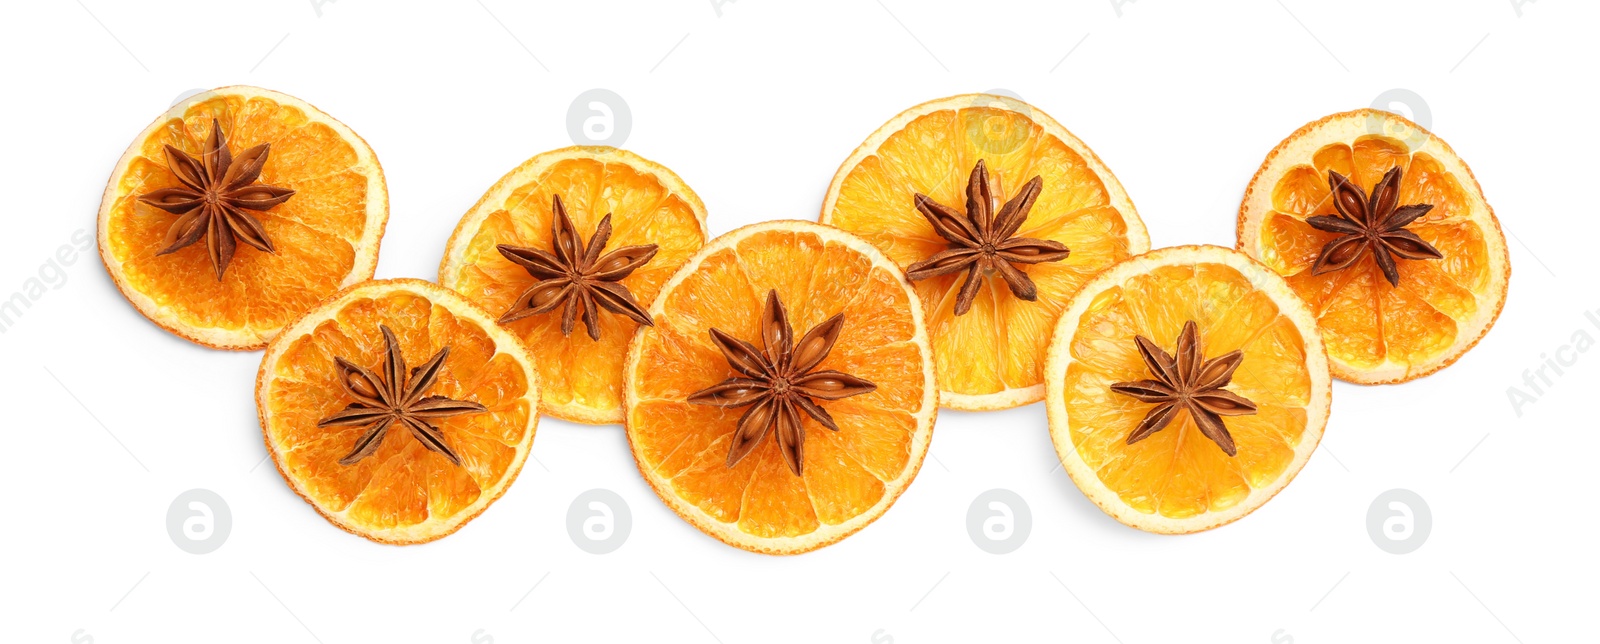 Photo of Dry orange slices and anise stars isolated on white, top view